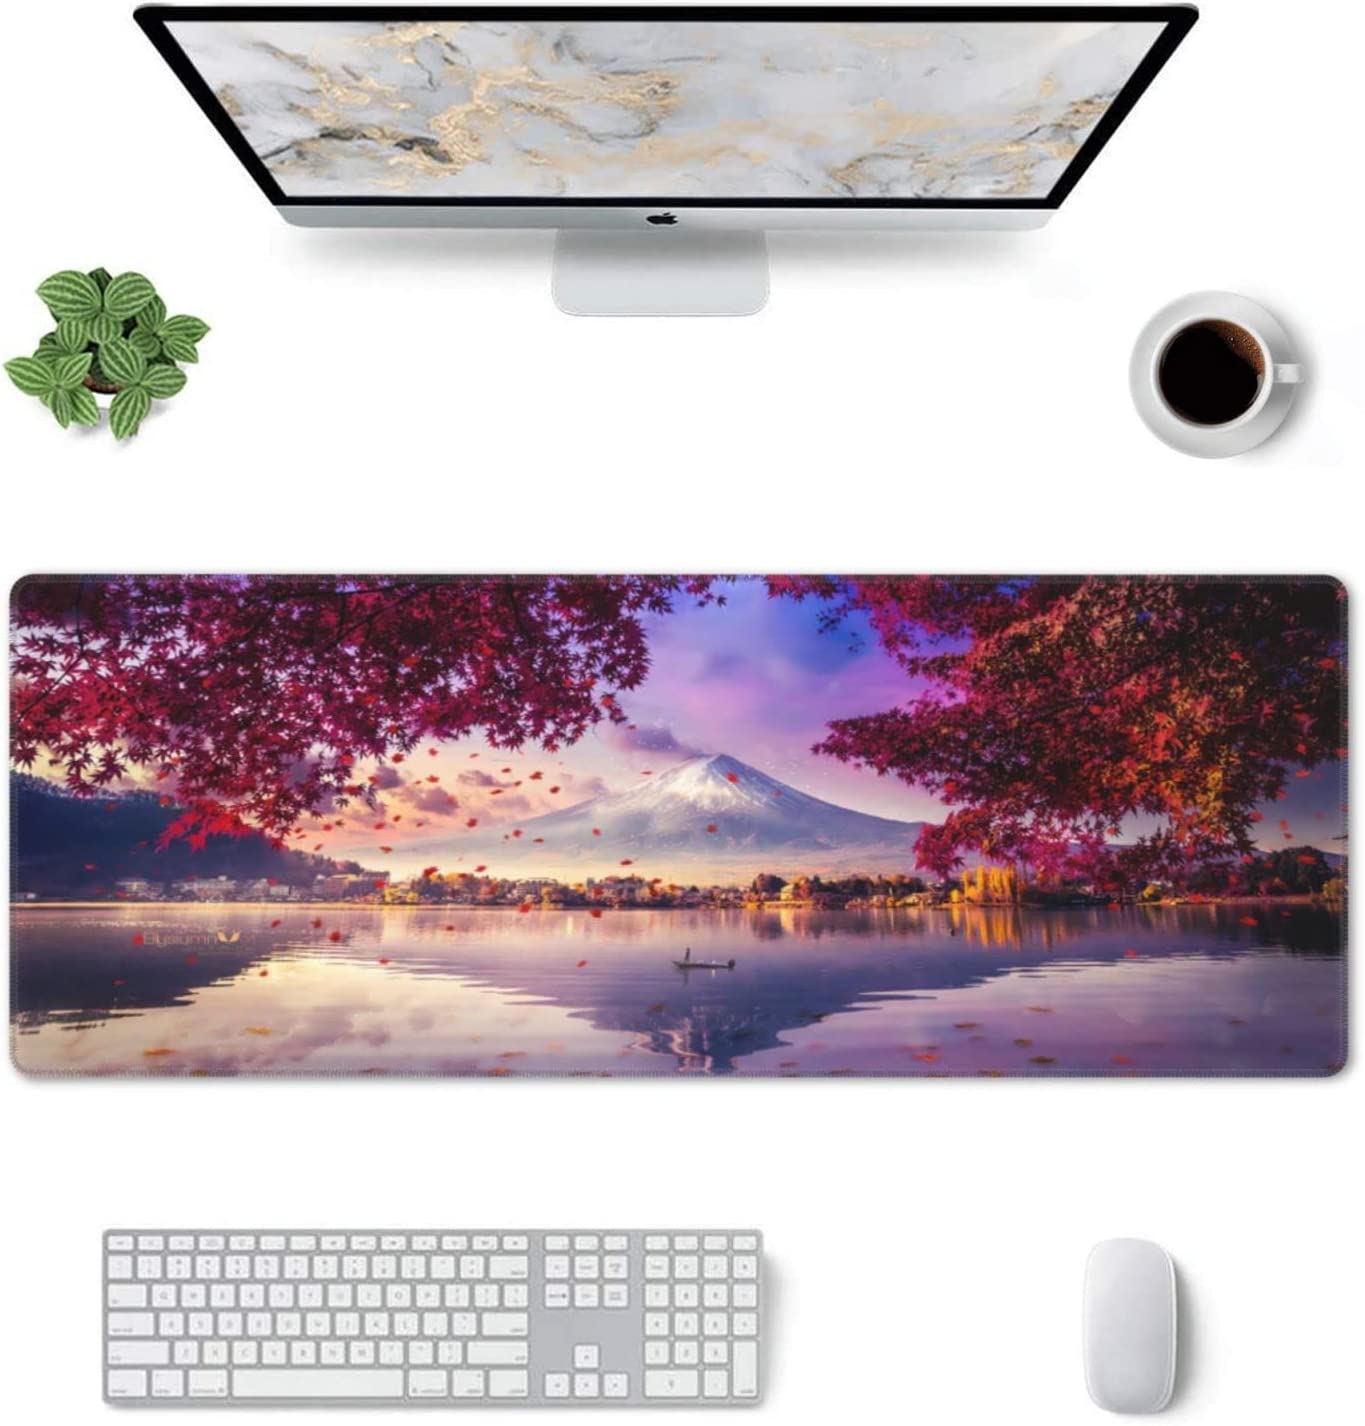 Japanese Cherry Blossom Ink Painting Fuji Mountain Scenery Game Mouse pad XL, Non Slip Rubber Base Mouse pad, Sewn Edge Table pad, Extended Large Mouse pad, 31.5 x 11.8 inches - image 3 of 6